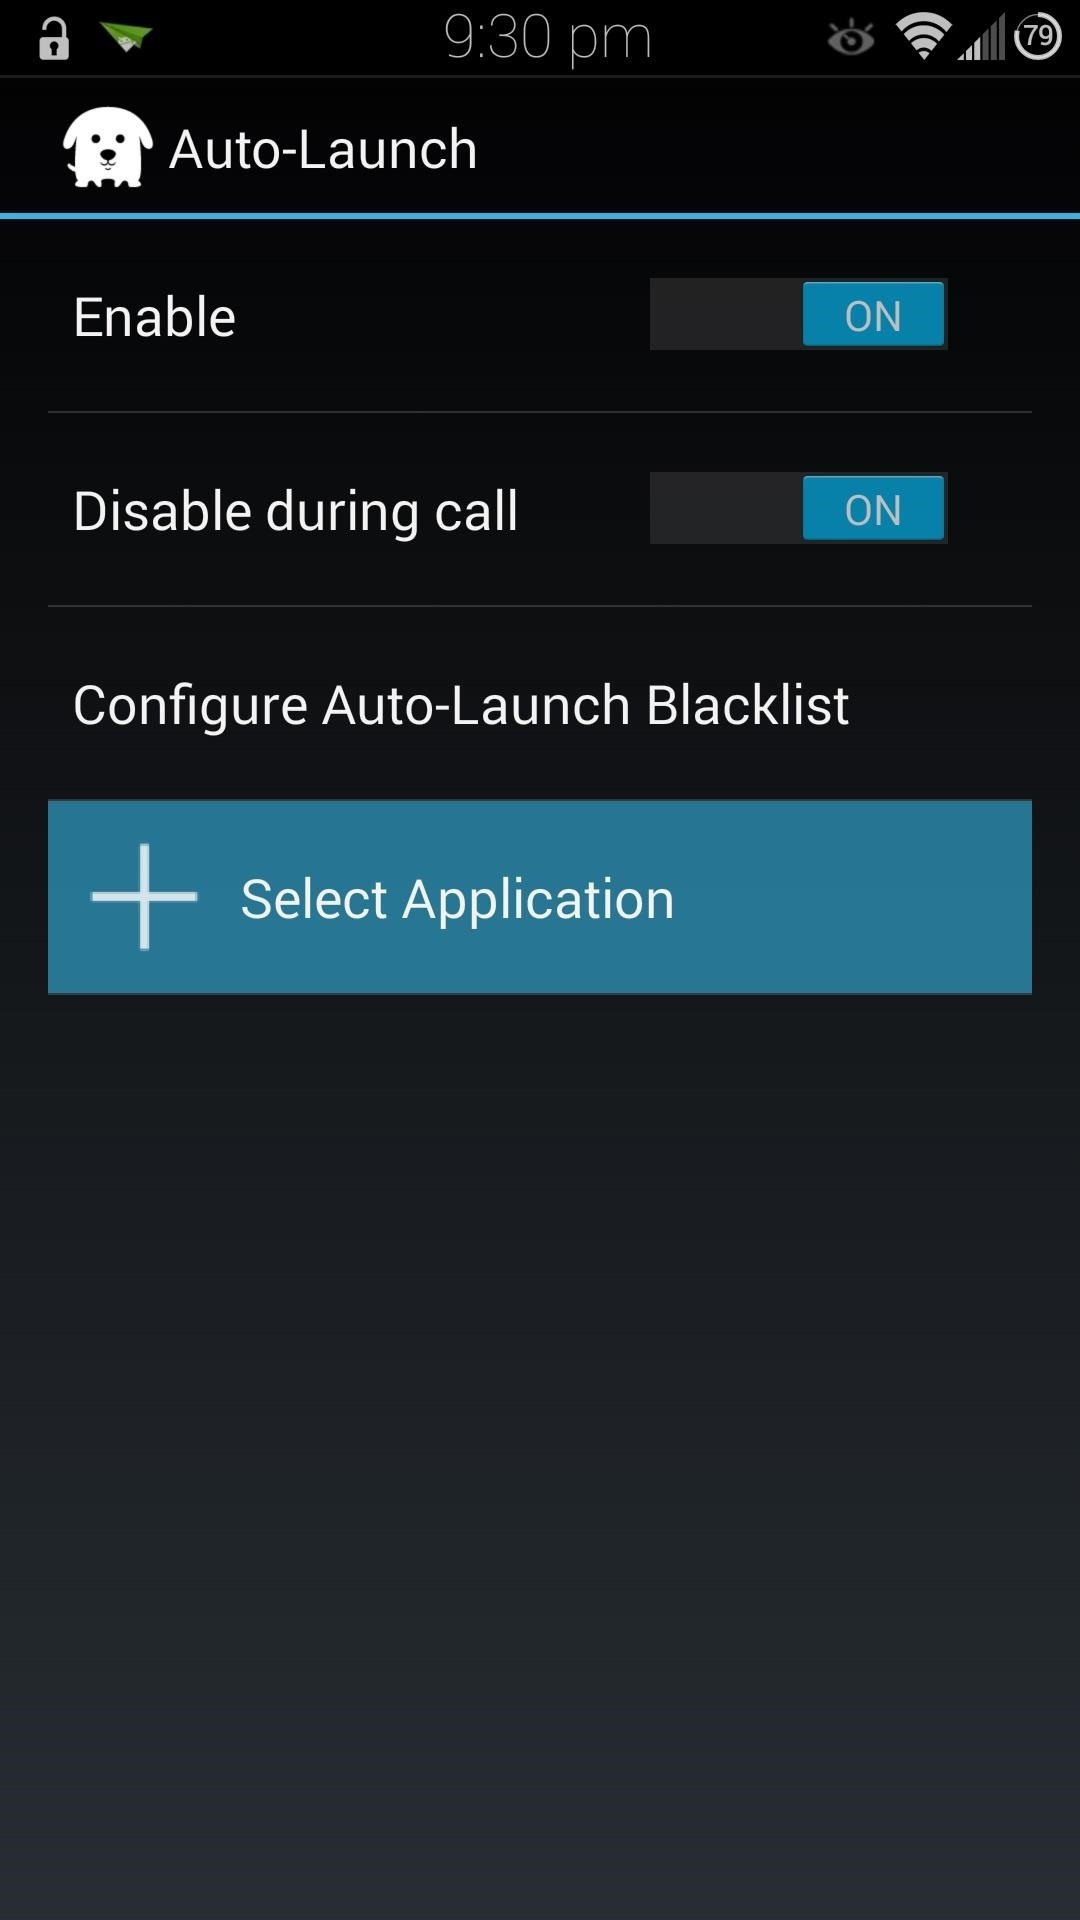 The Ultimate S Pen Customization Tool for Your Galaxy Note 3